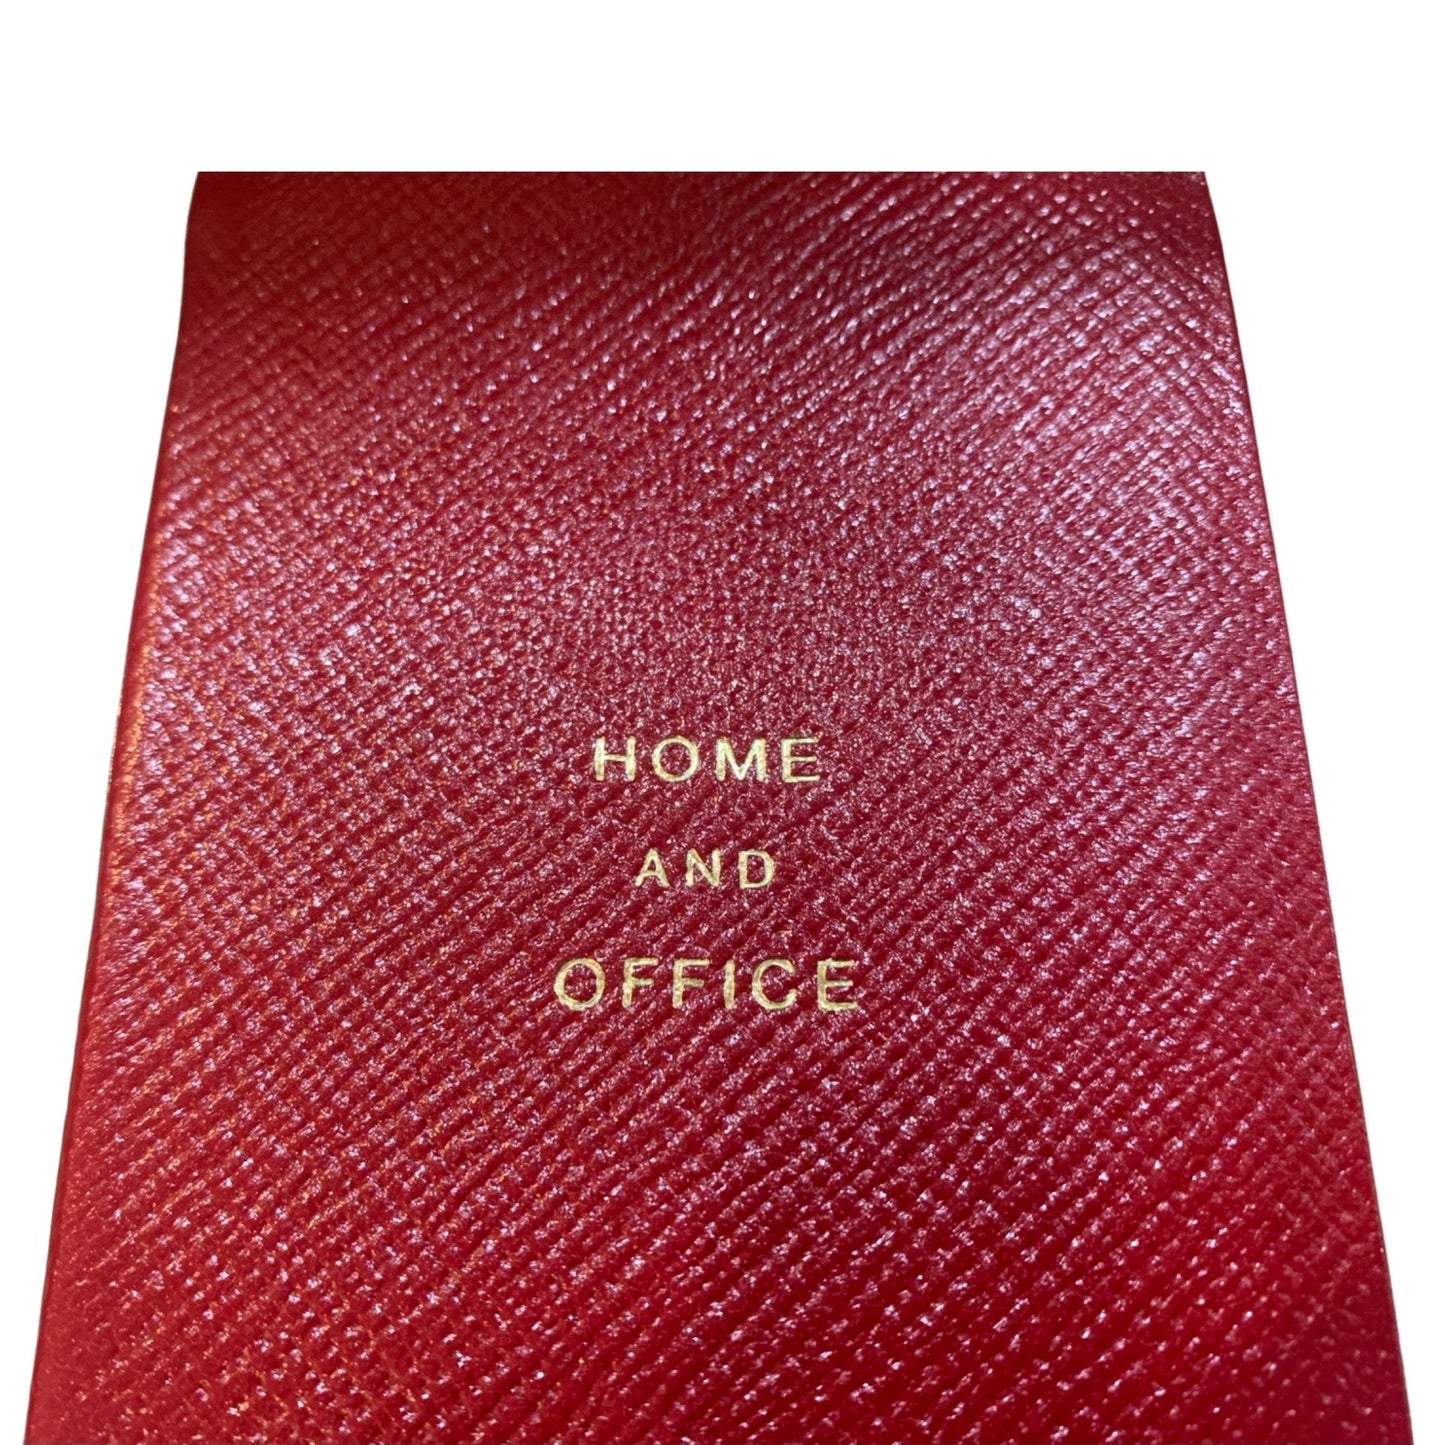 Address Book | Home and Office | Pocket Address Book | 5 by 3 inches | Cross Grain Leather | A53LHO